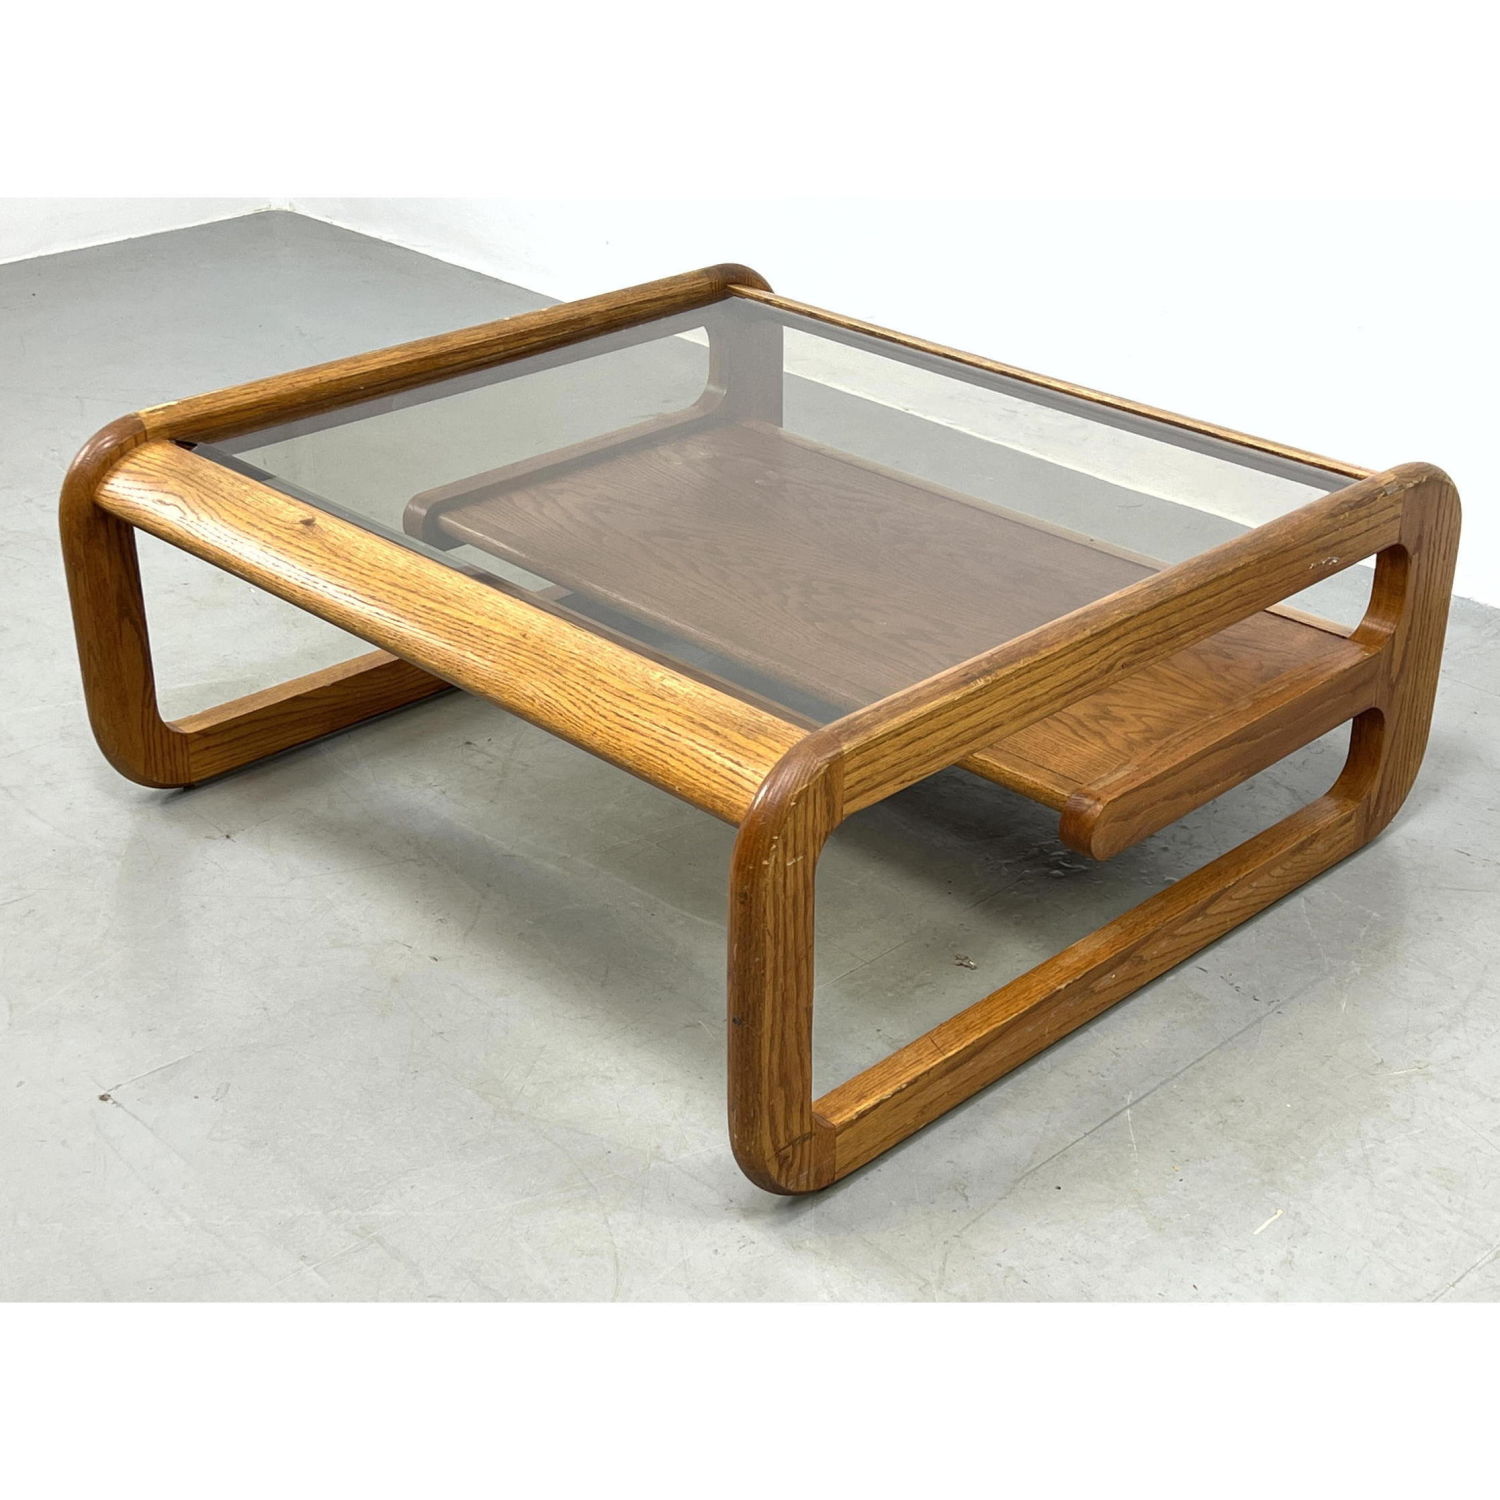 LOU HODGES Oak Coffee table with 2b95c8